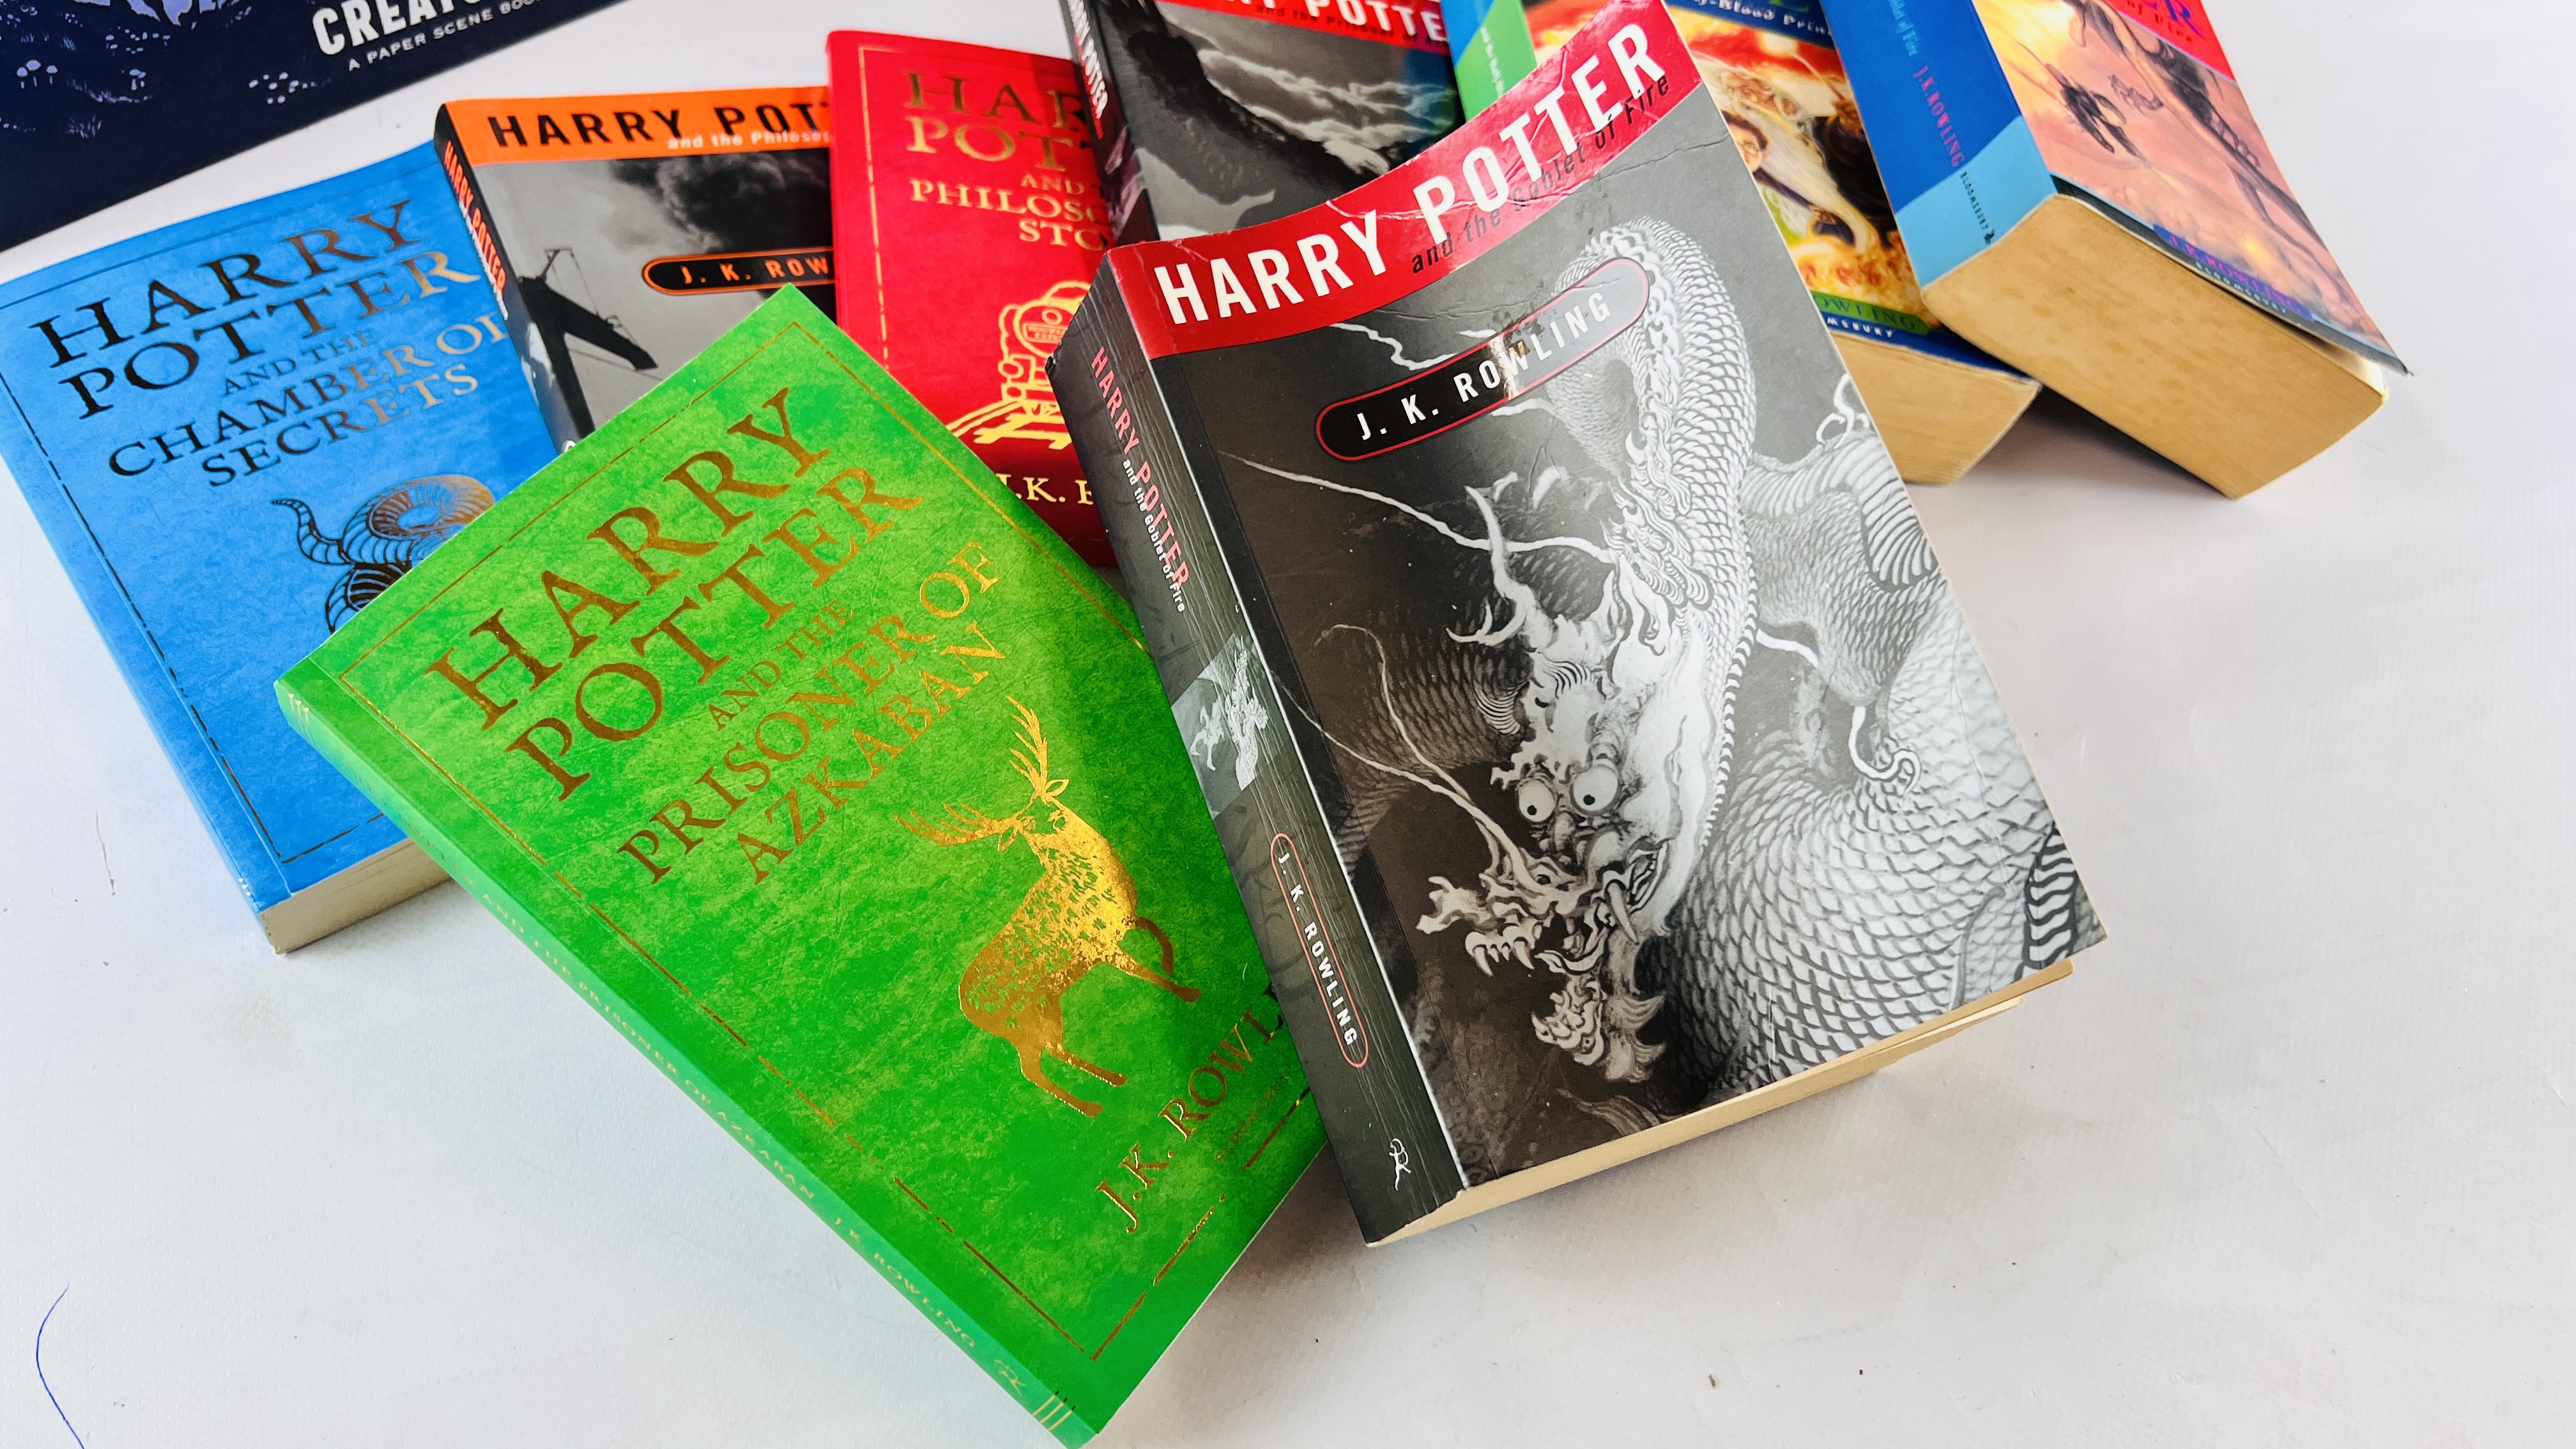 COLLECTION OF HARRY POTTER BOOKS TO INCLUDE FIRST EDITIONS, PAPERBACKS, HARRY POTTER CREATURES ETC. - Image 5 of 6